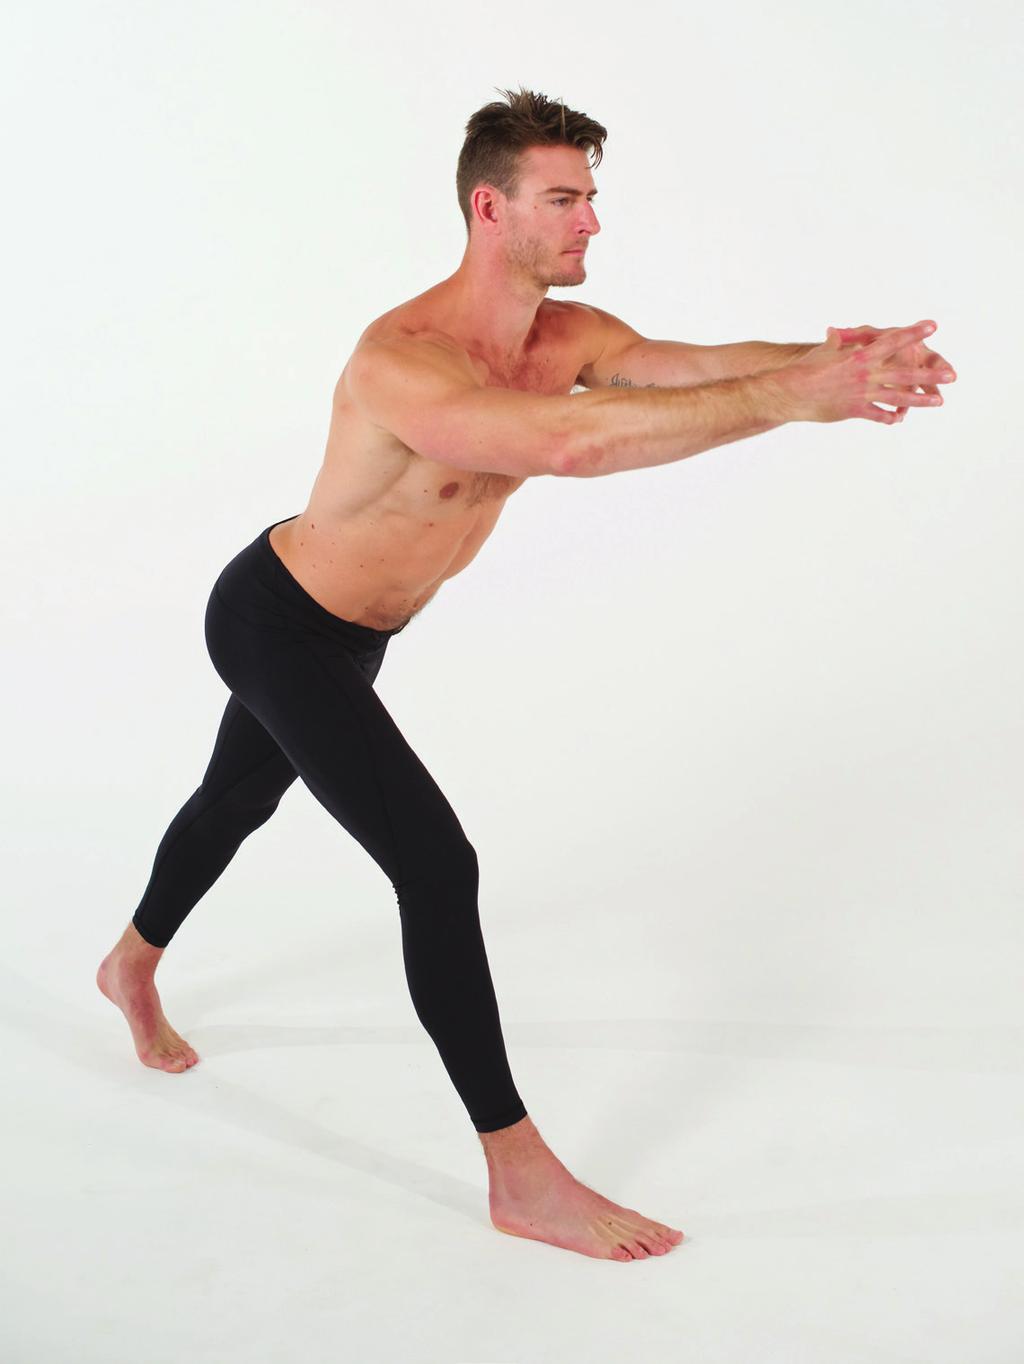 Bring your hands to measuring stick hand position and decompress, breathing your ribs away from your hips all of the way around your body.